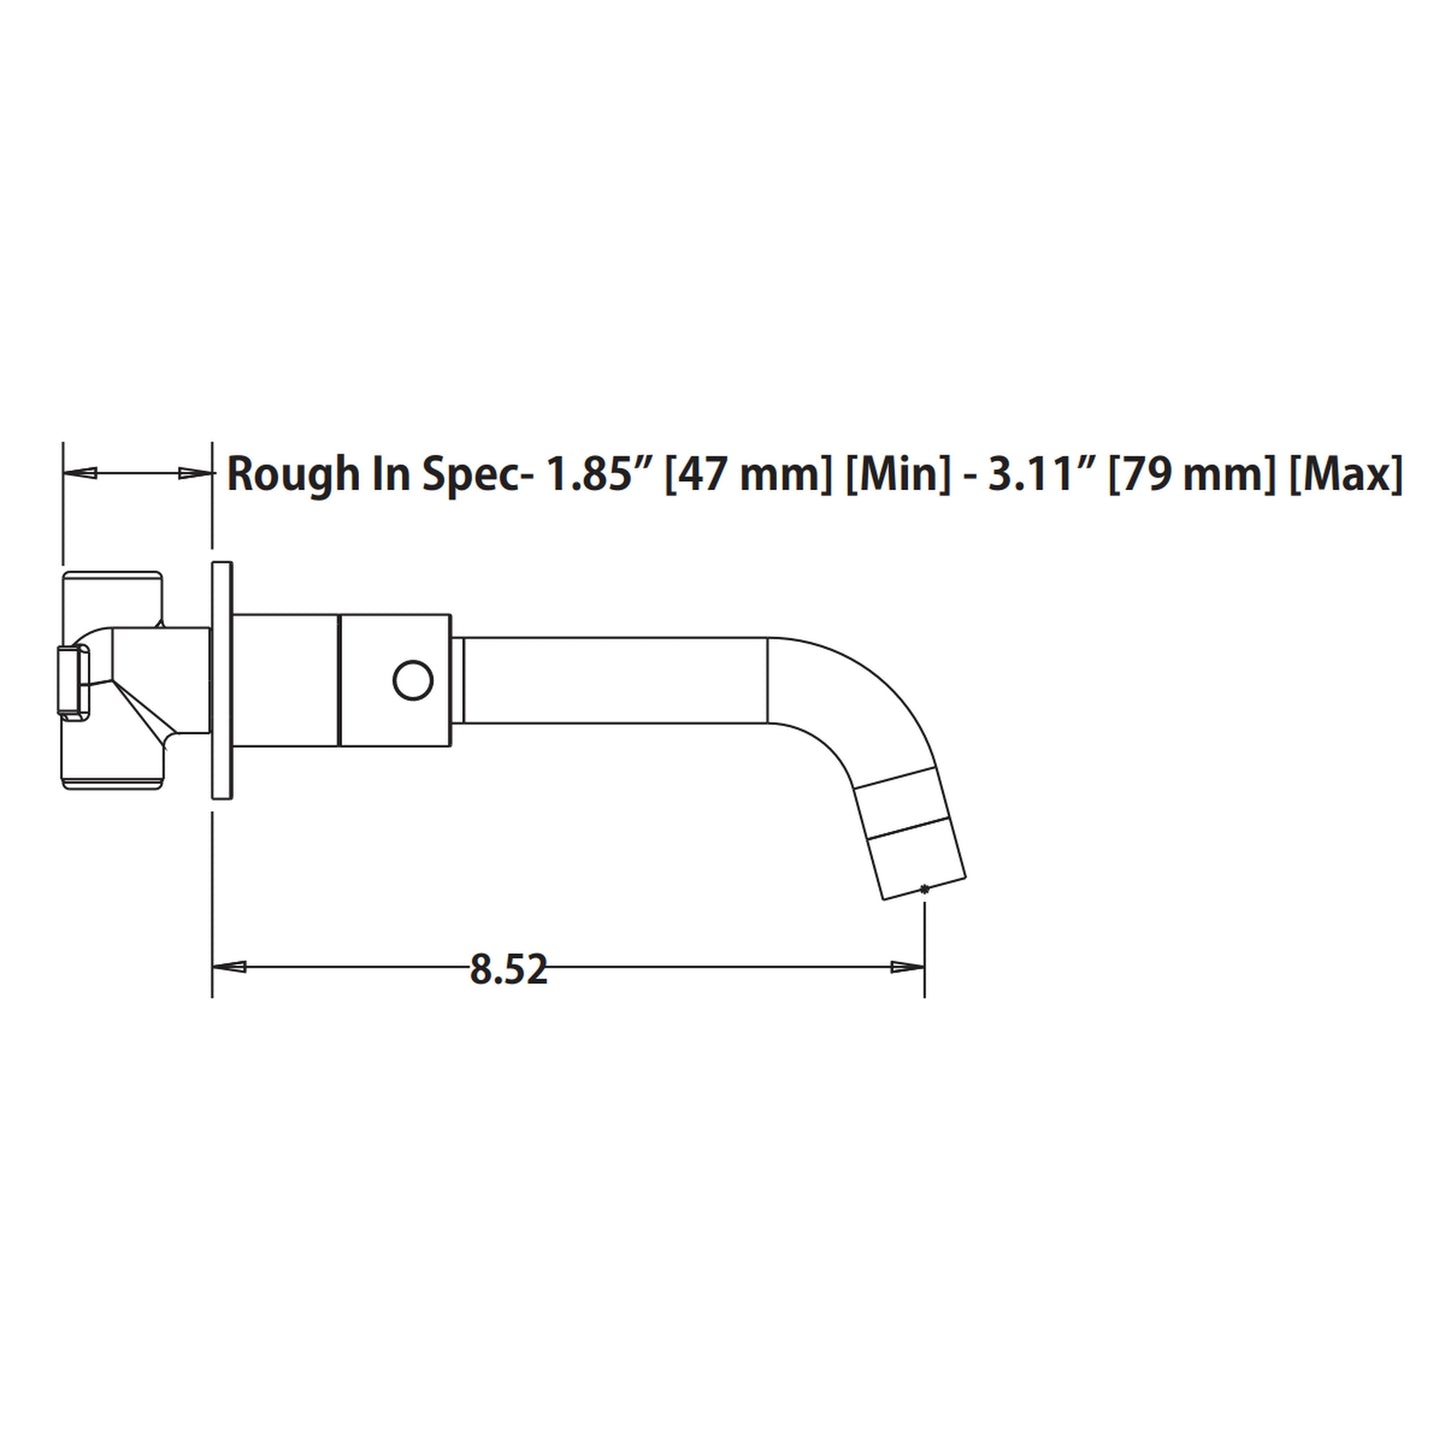 Isenberg Serie 100 8" Three-Hole Brushed Nickel PVD Wall-Mounted Bathtub Faucet